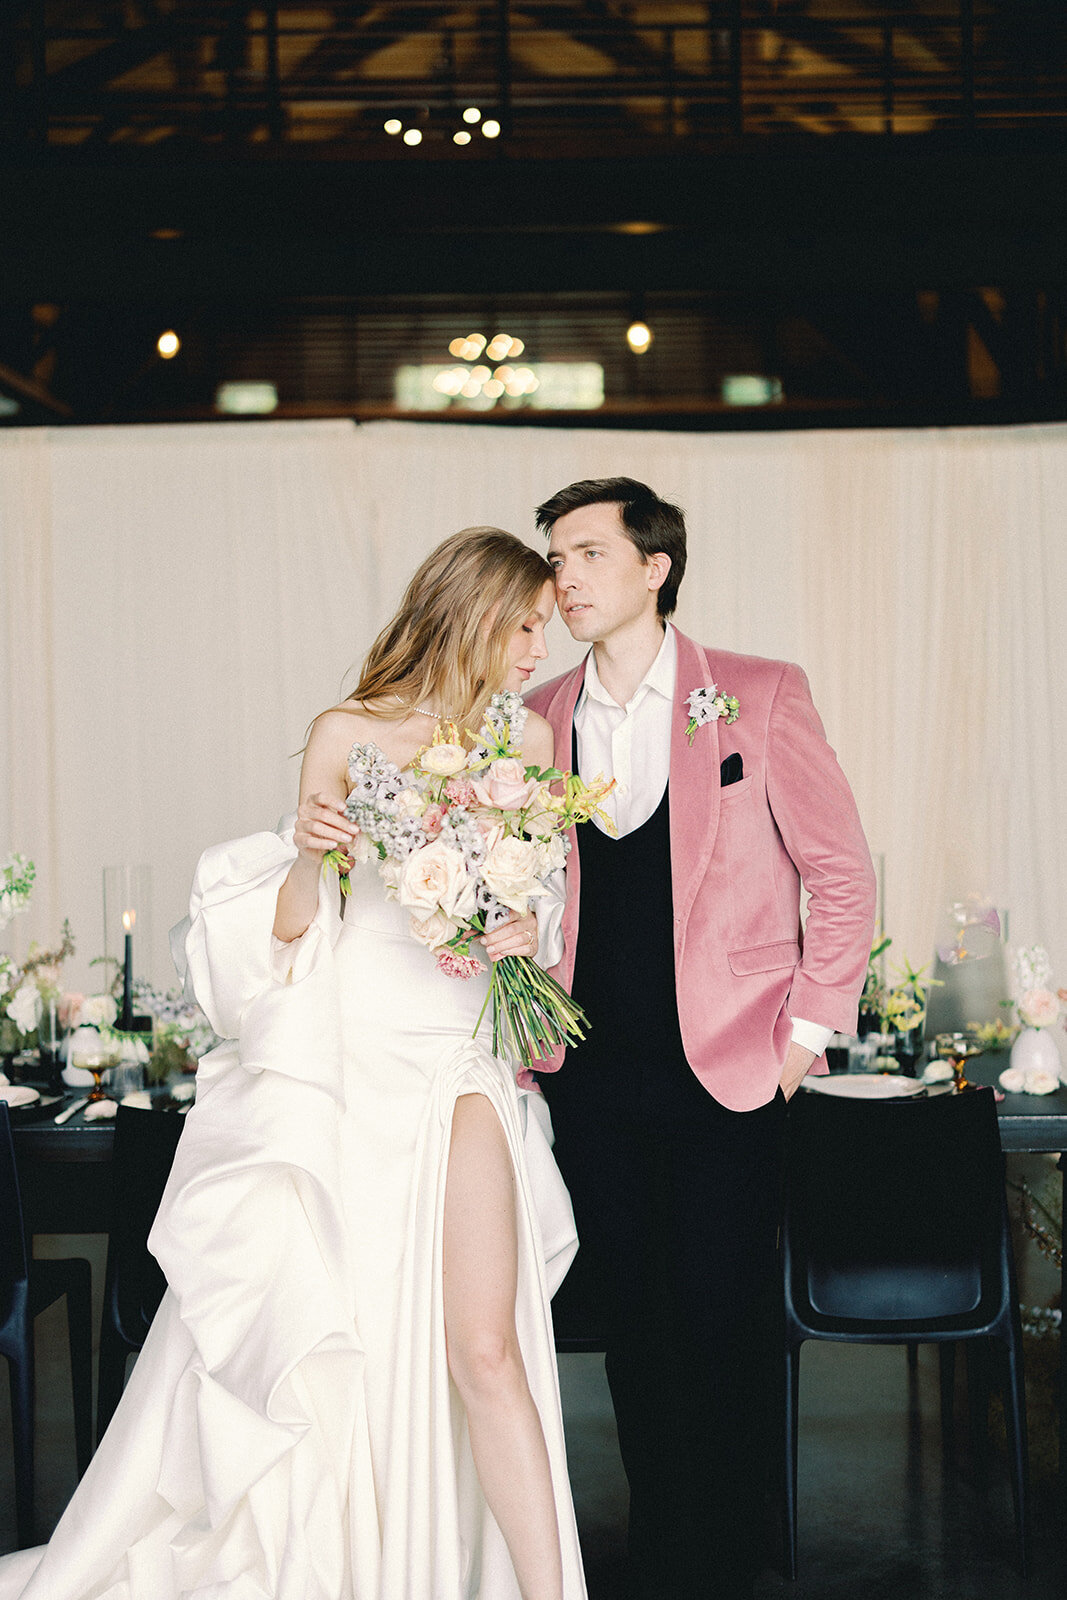 Groom in a pink jacket and bride in an elegant dress holding a pastel colored bouquet